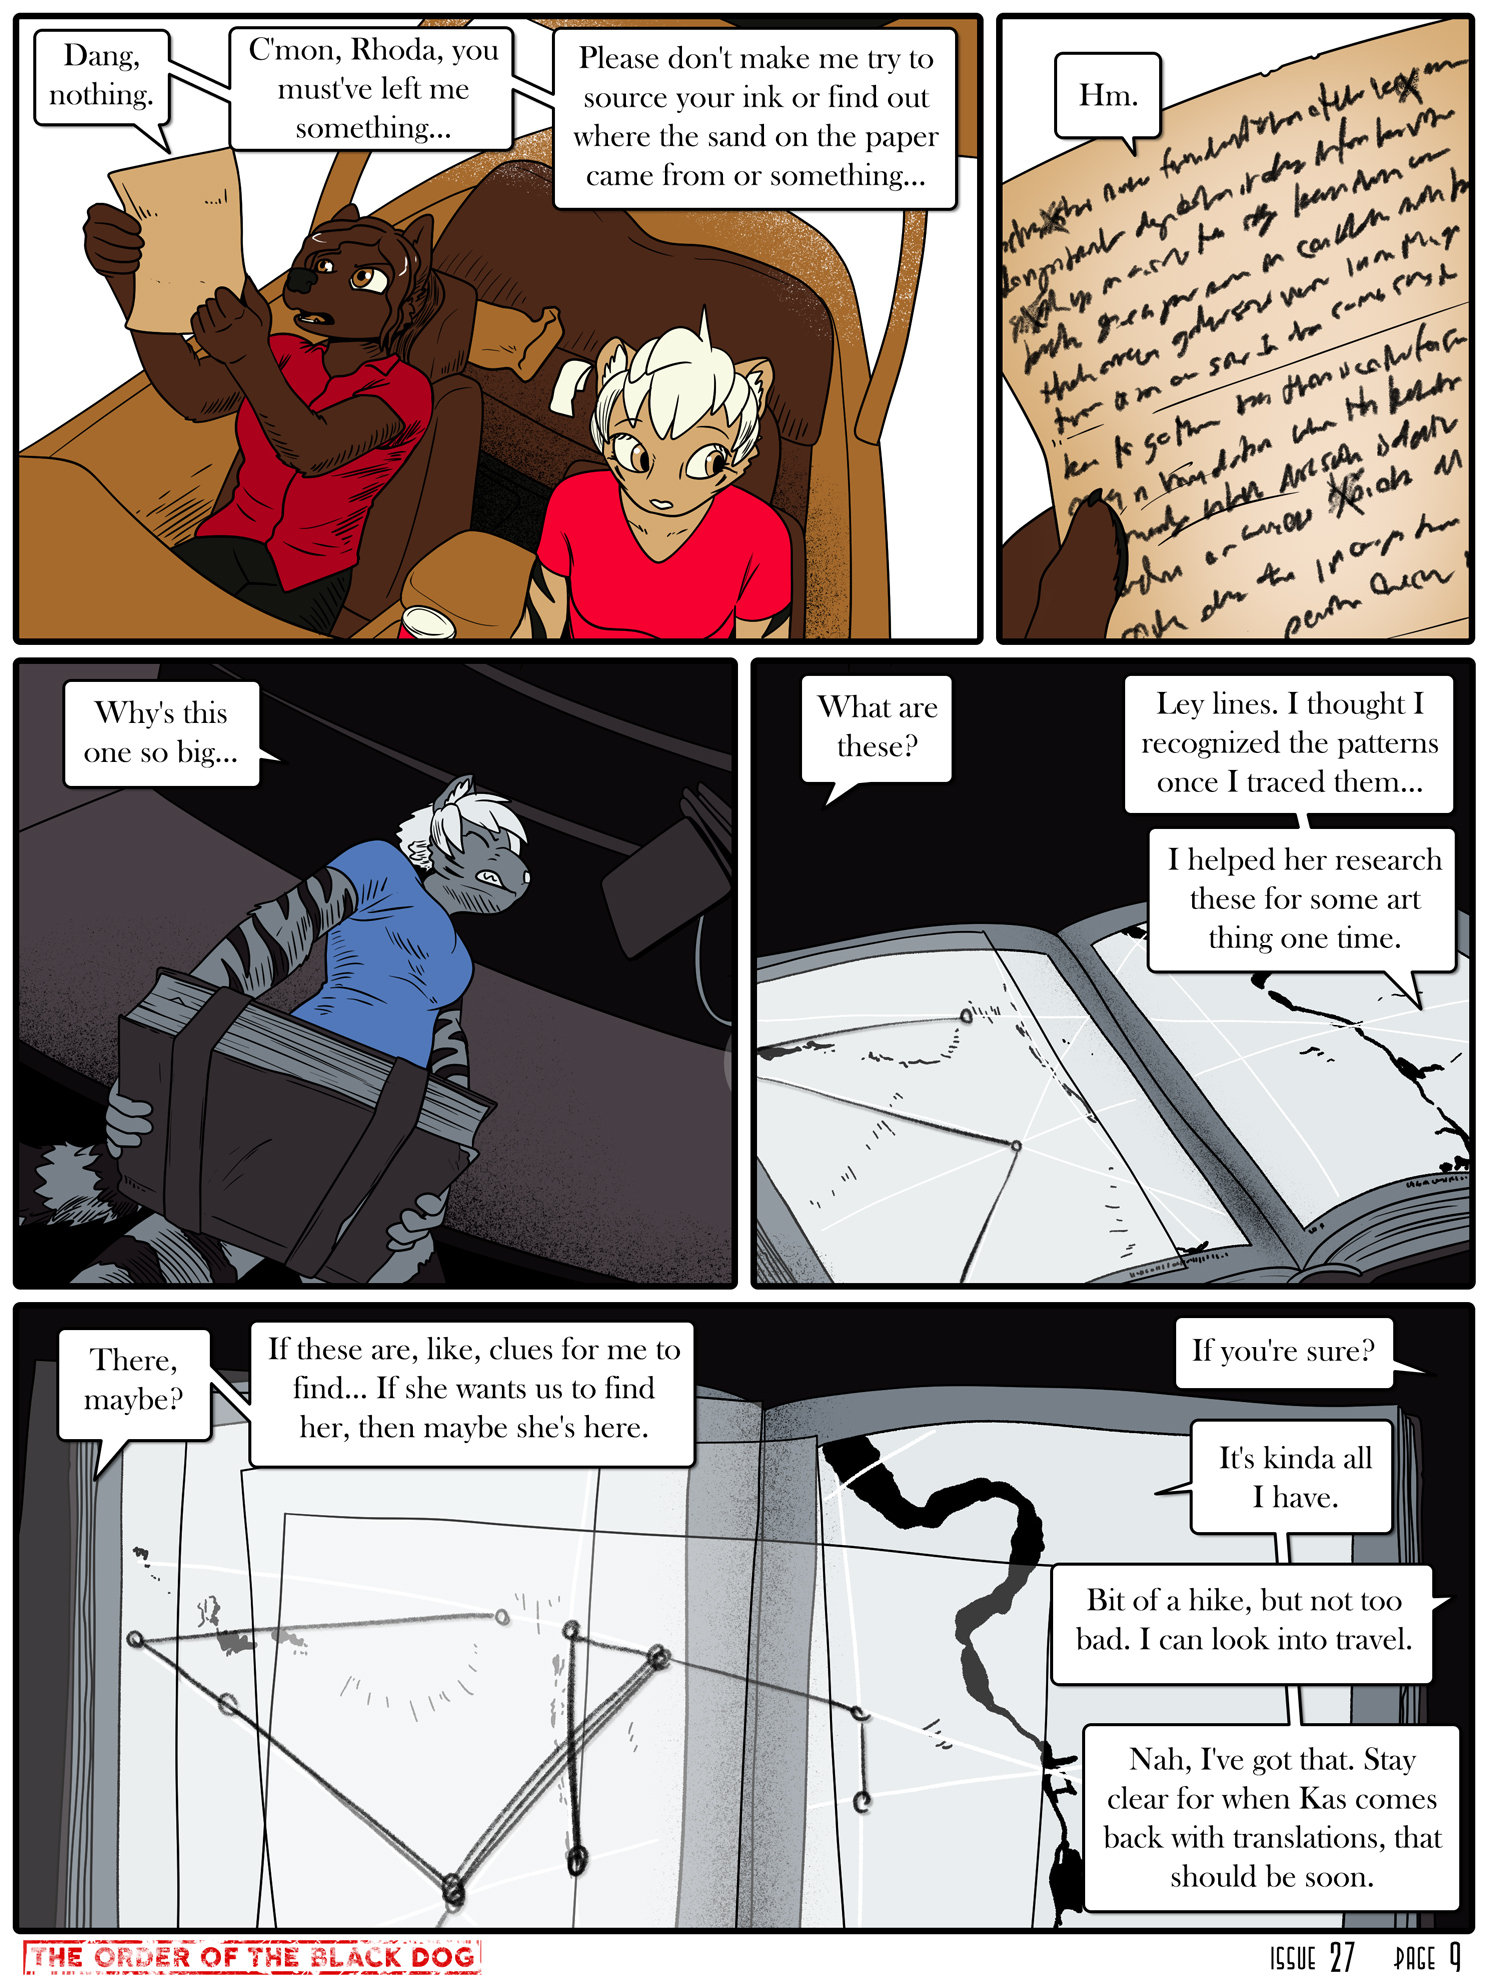 Issue 27, Page 9